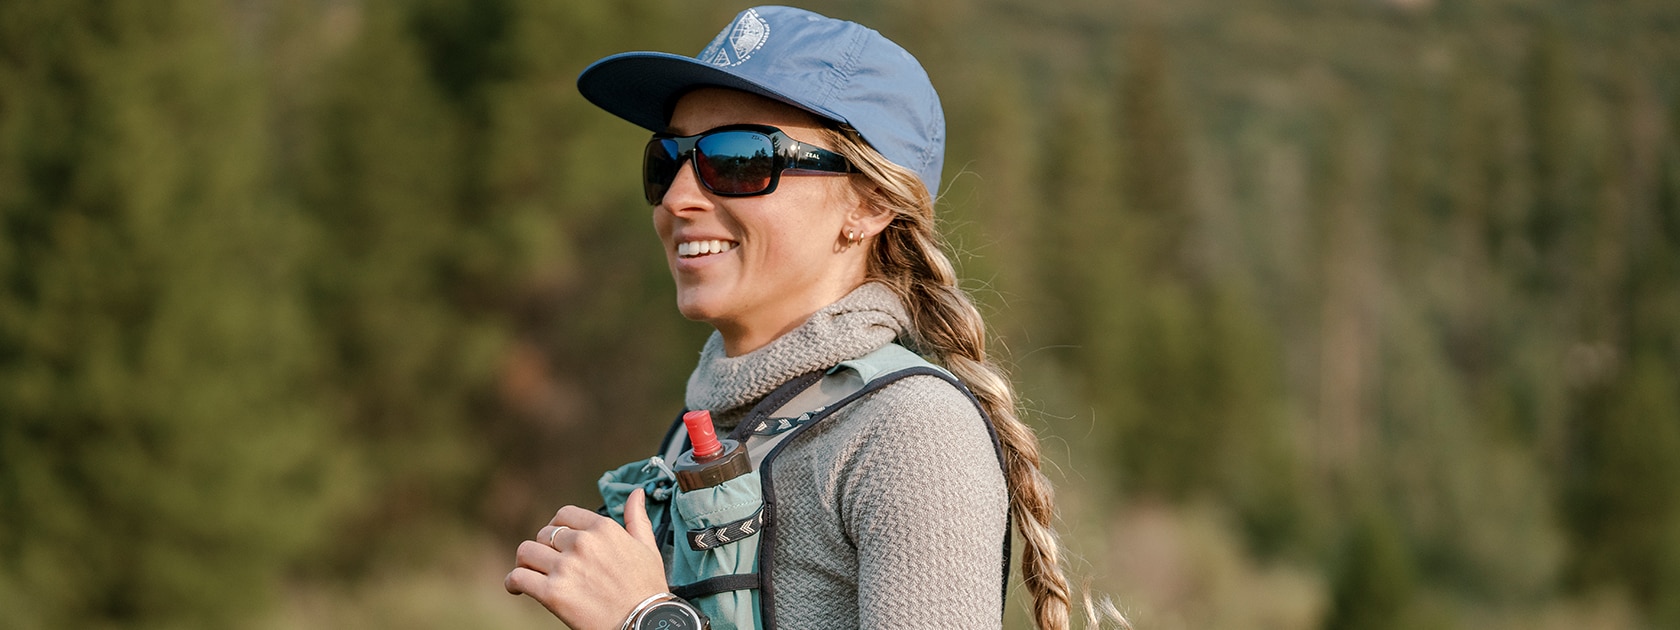 close up image of a woman running wearing zeal polarized sunglasses